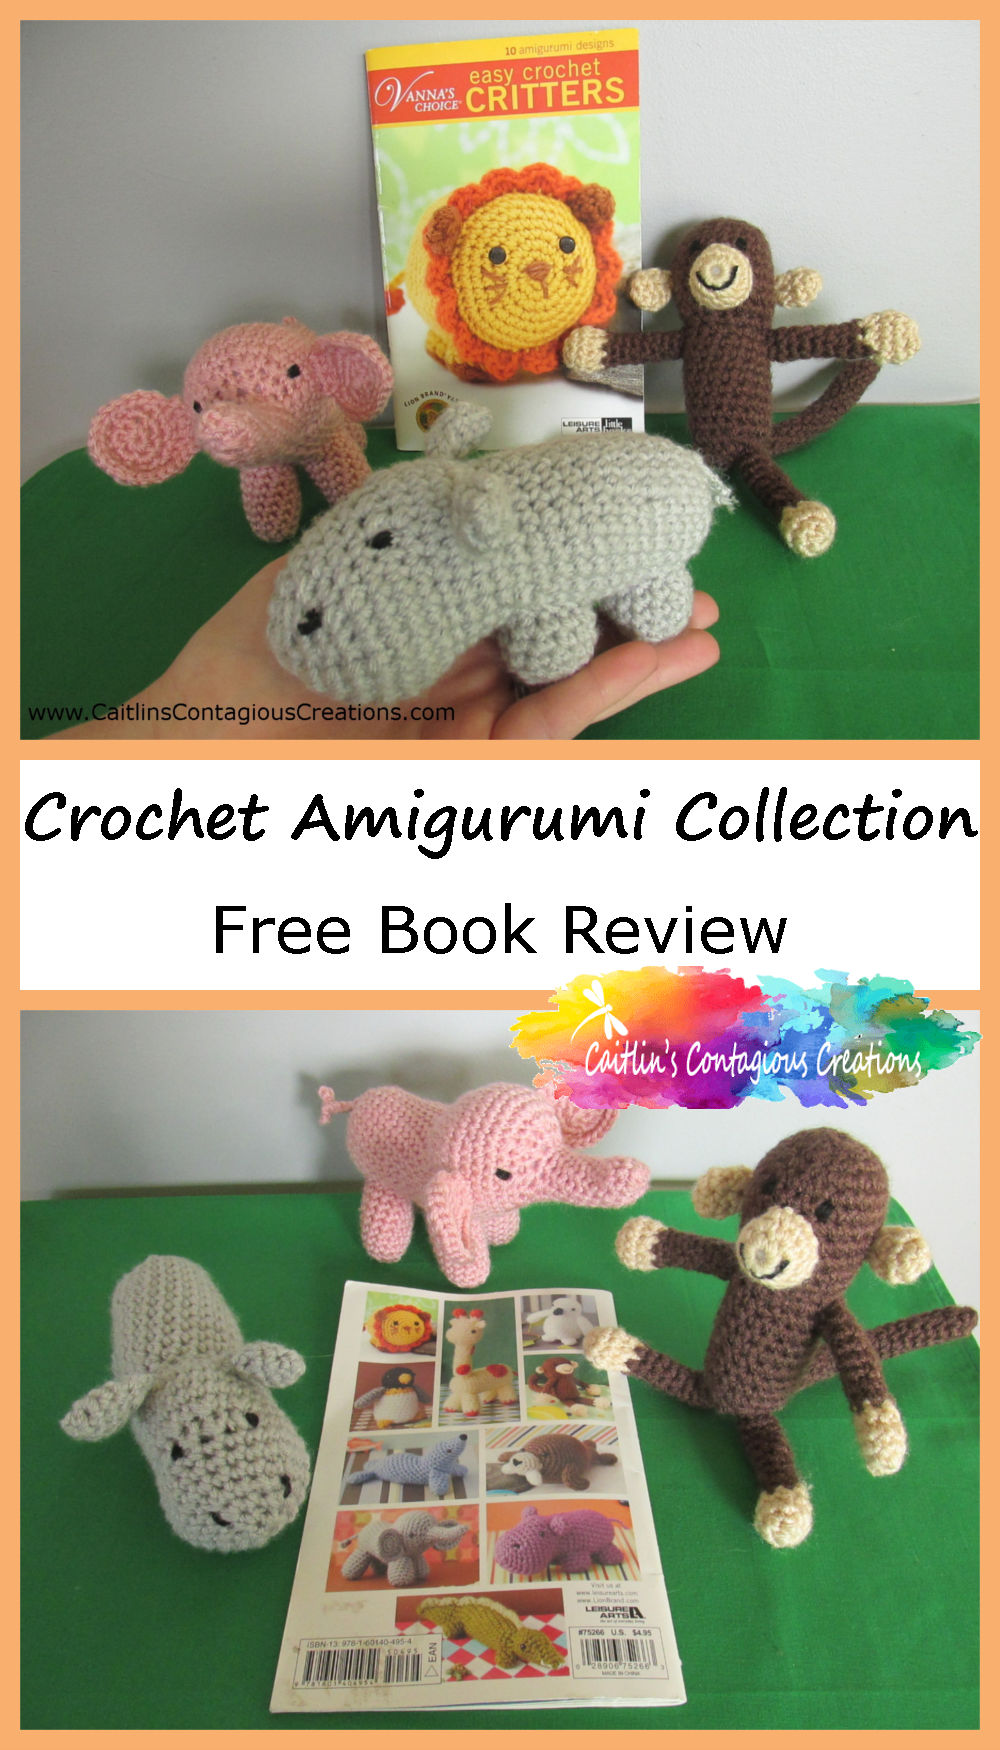 Front and back covers of easy crochet critters with amigurumi animals